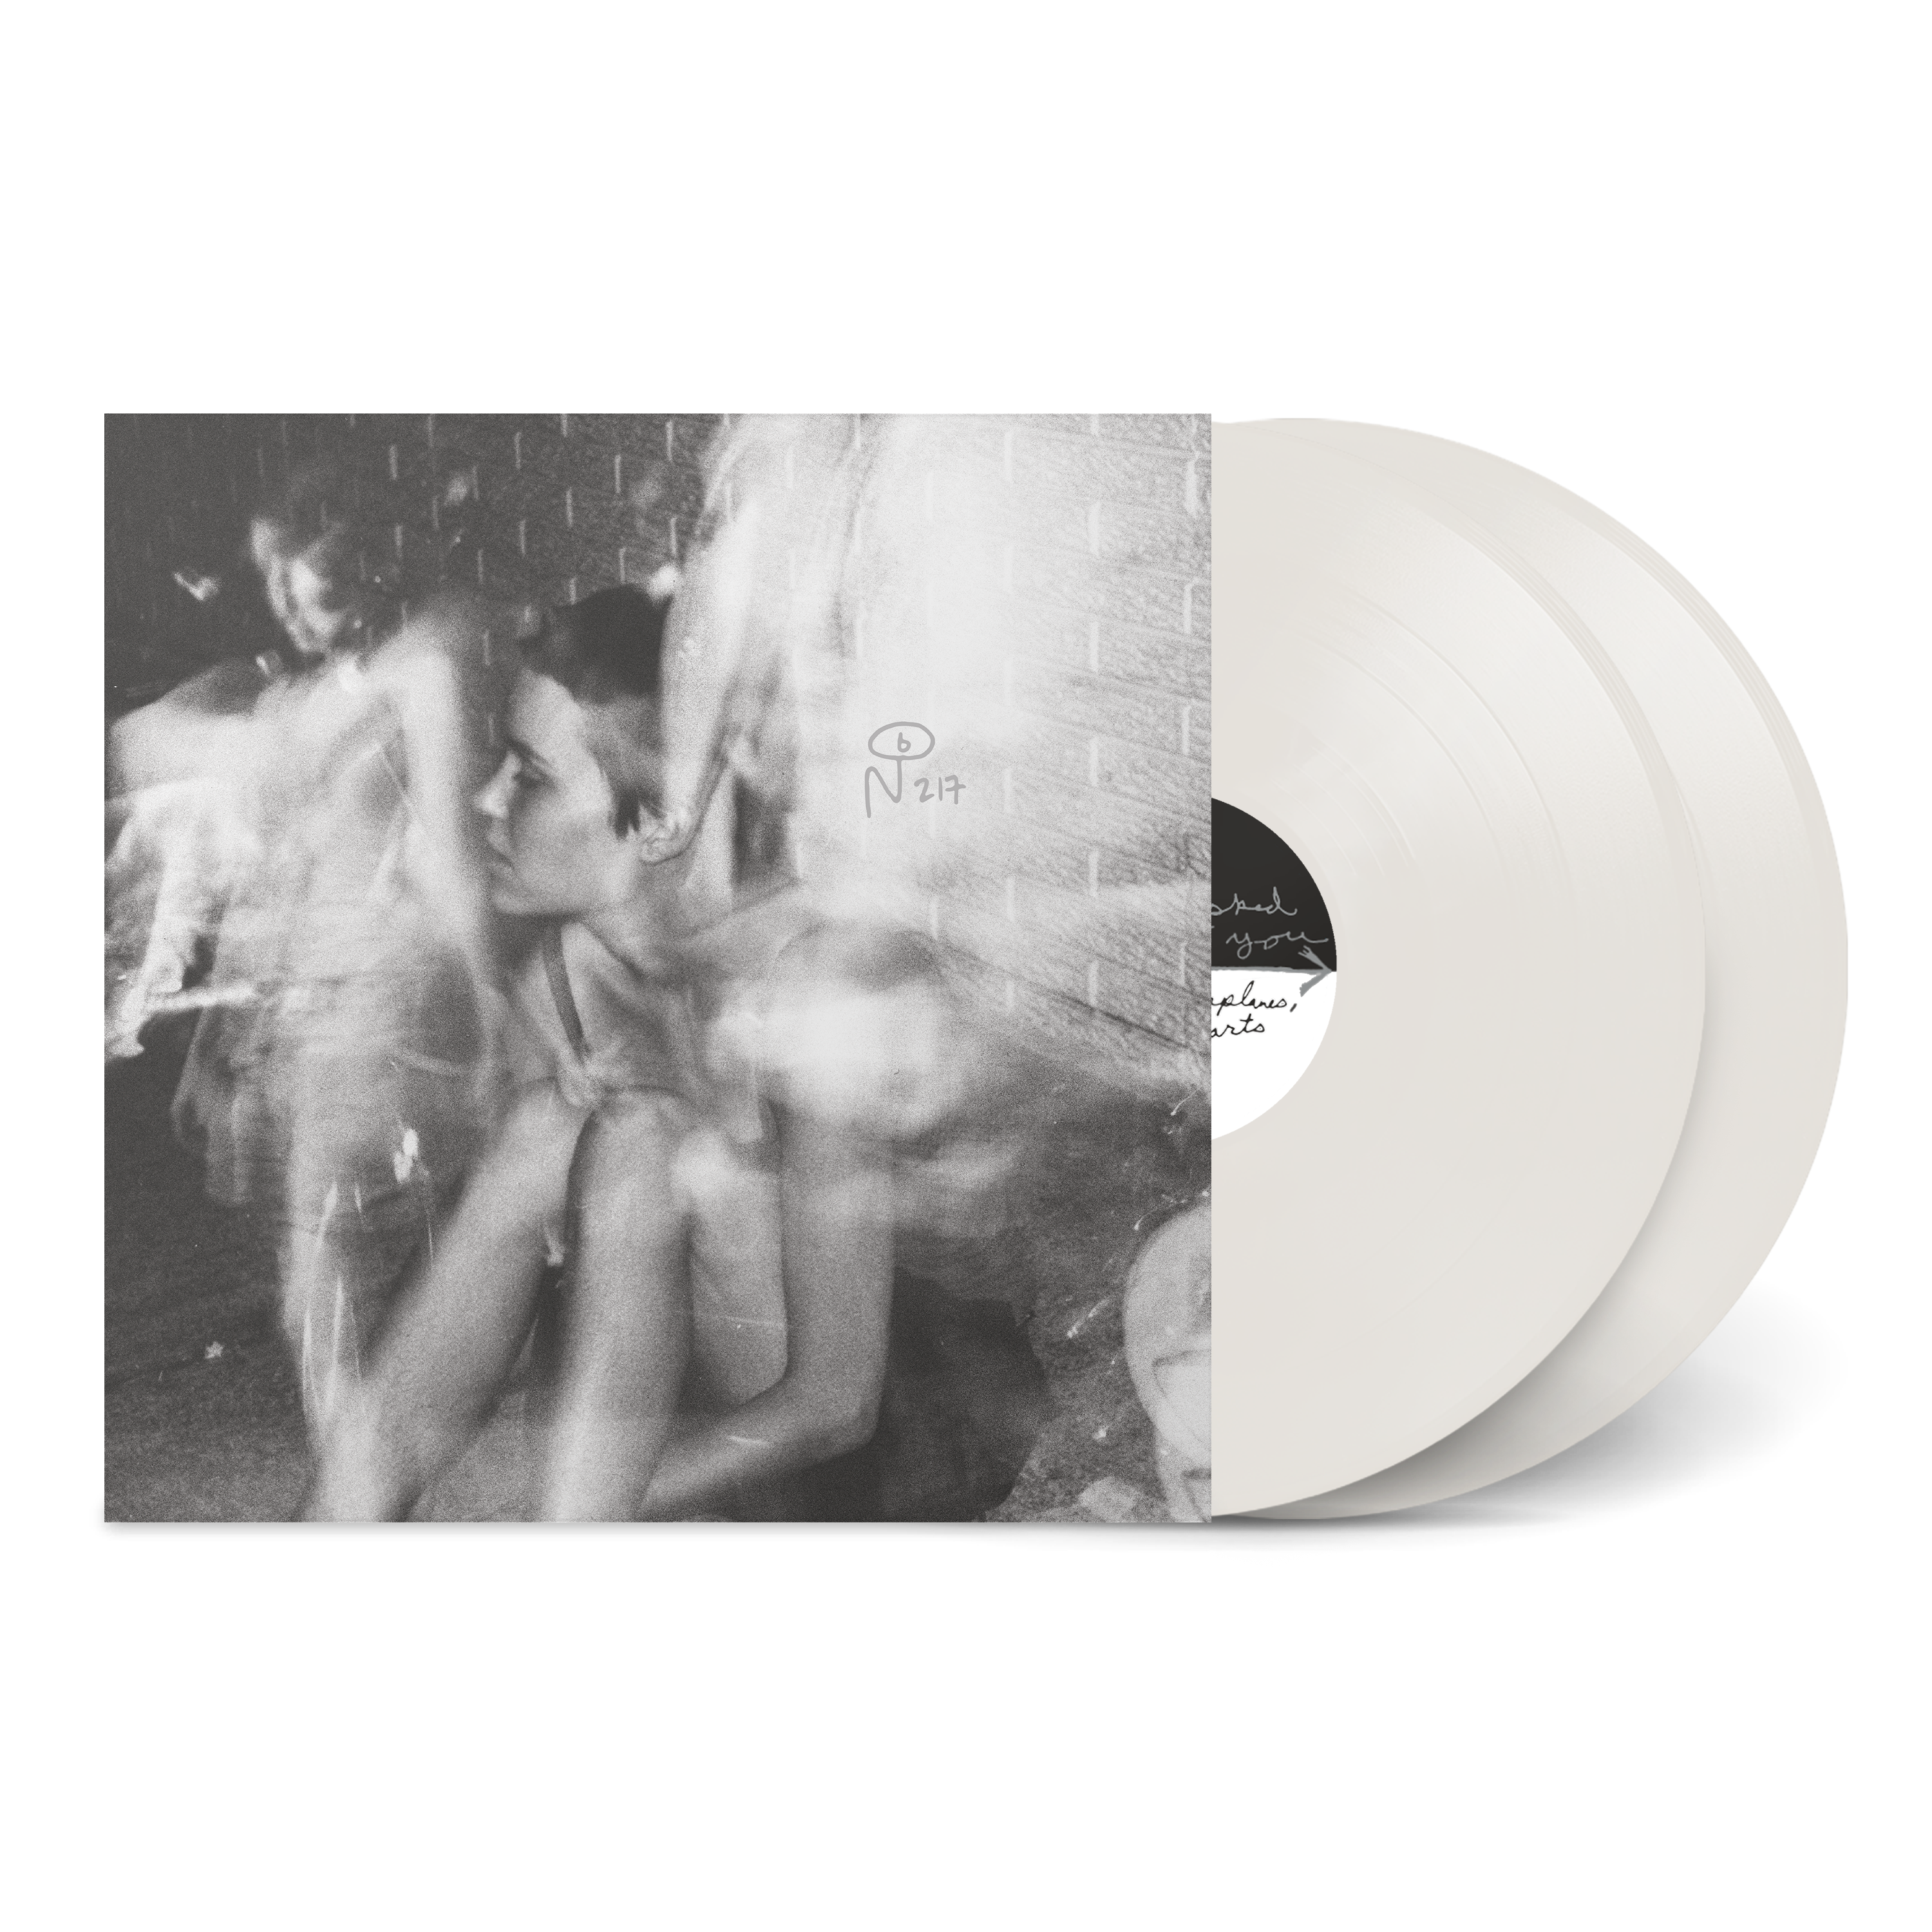 Everyone Asked About You - Paper Airplanes, Paper Hearts: Limited White Vinyl 2LP